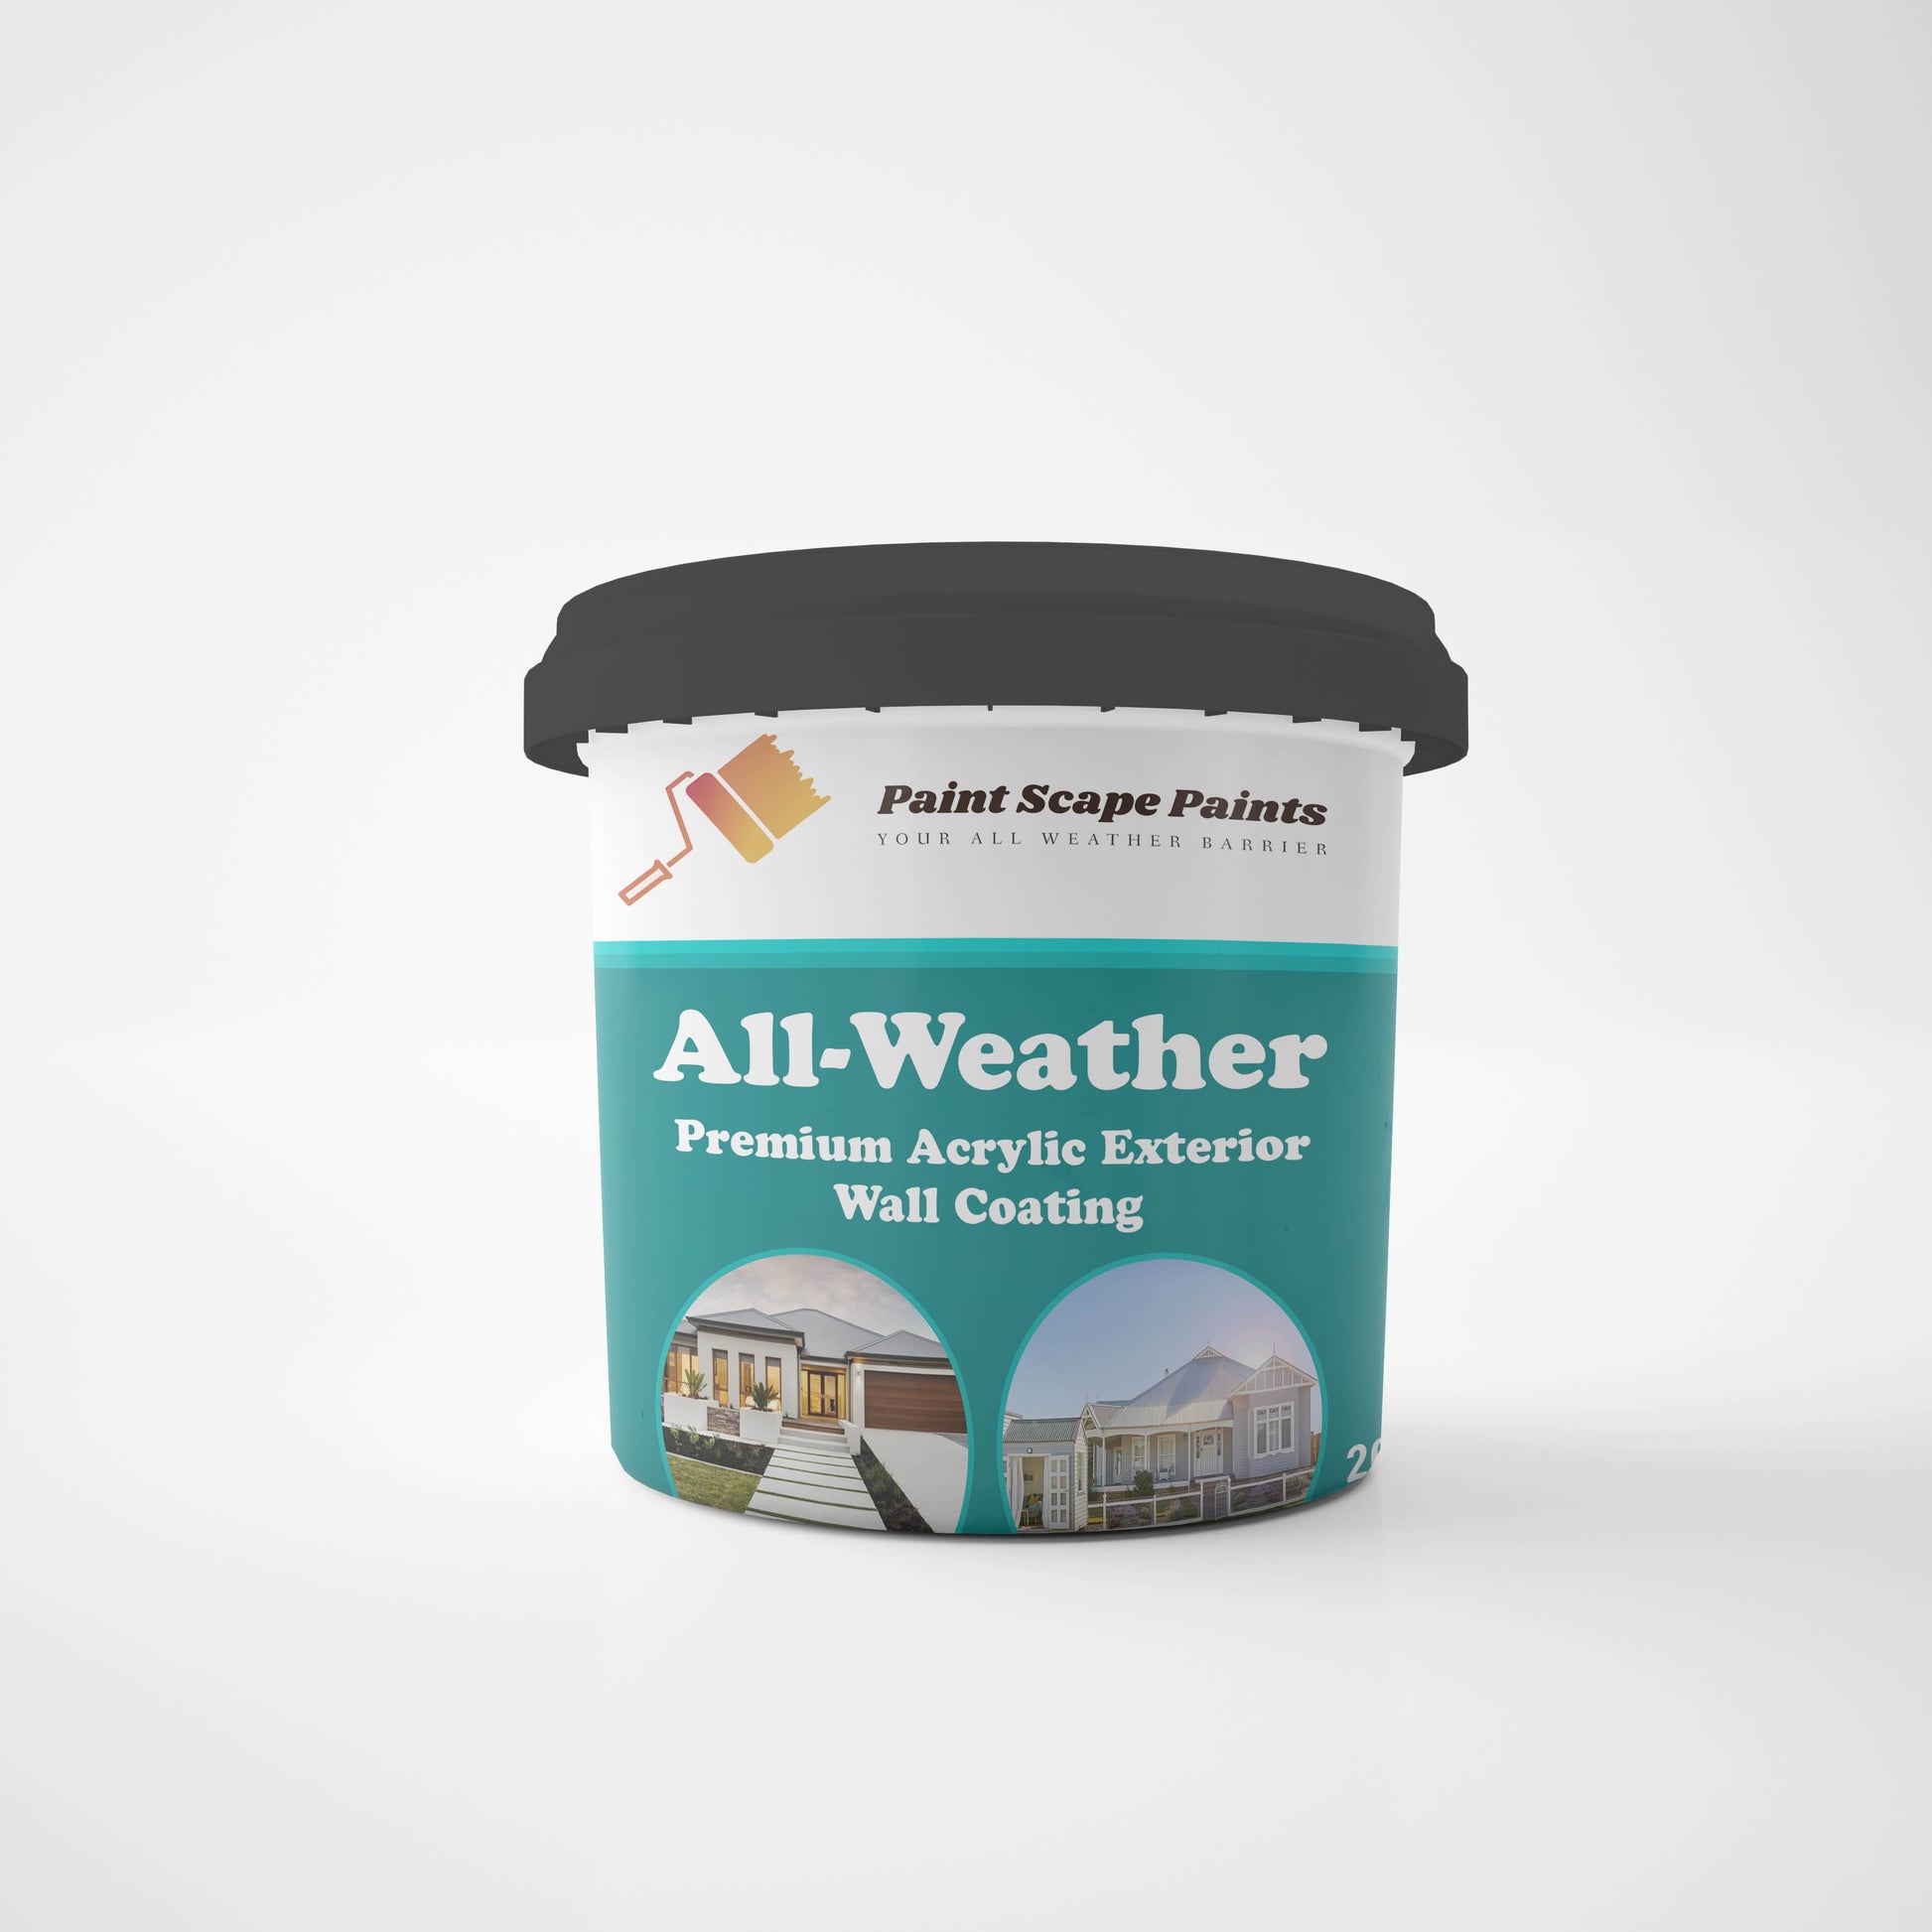 All-Weather Premium Acrylic Paint Scape Paints, Exterior Pure Acrylic Wall Paint